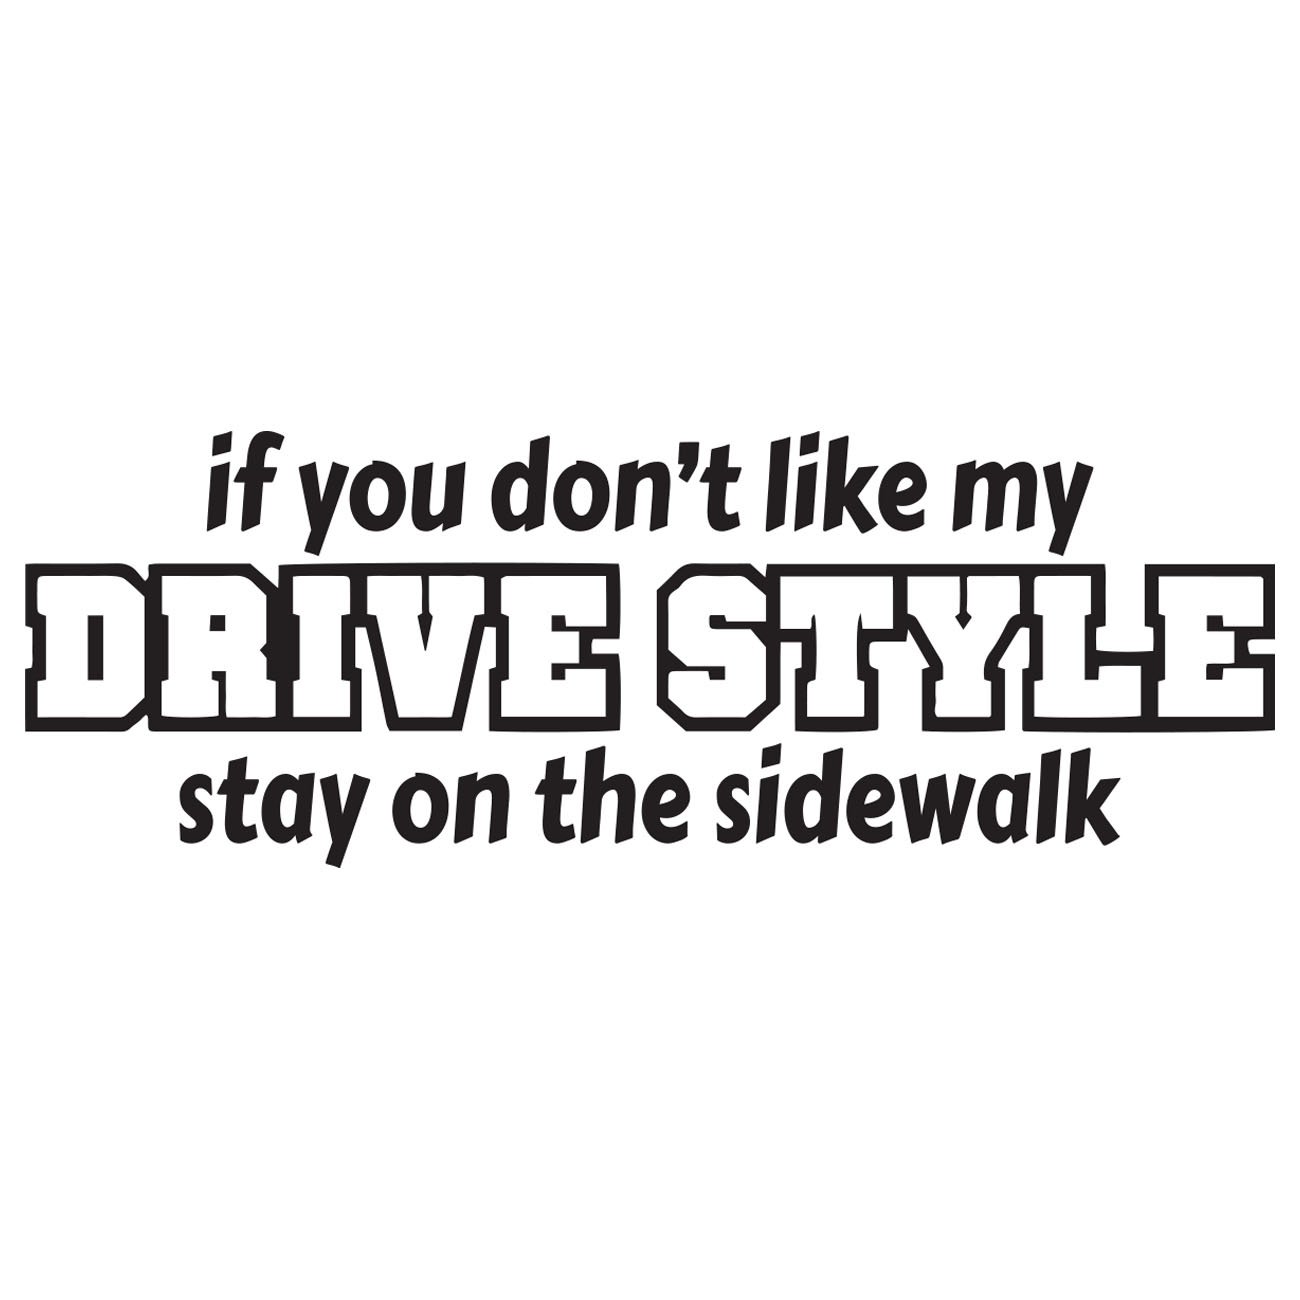 If you dont link my drivestyle - Stay on the sidewalk